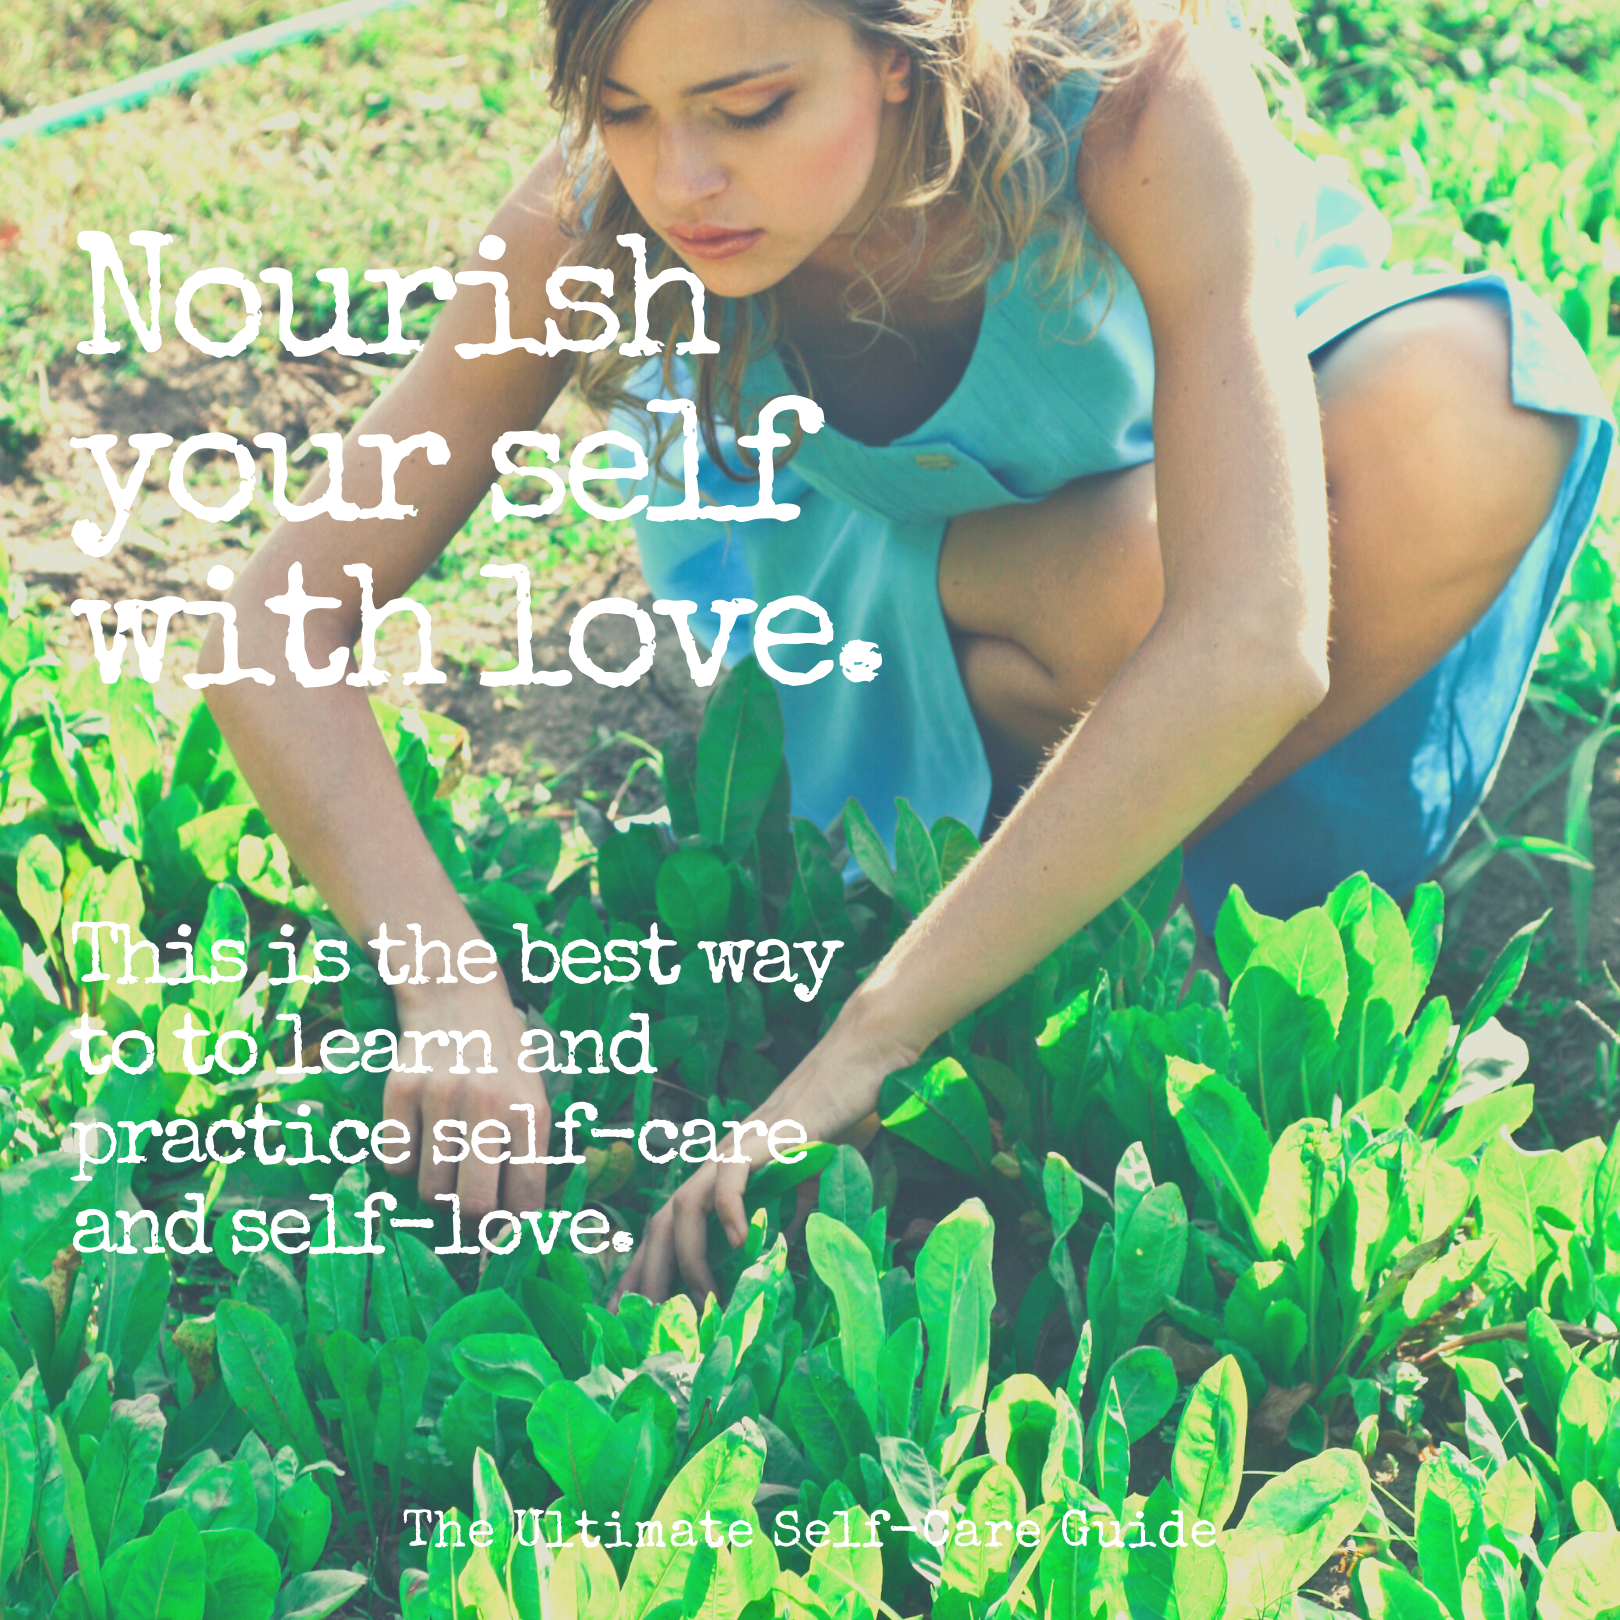 Nourish your self with love. This is the best way to to learn and practice self-care and self-love. Dorothy Ratusny for Thrive Global (image of woman in garden)